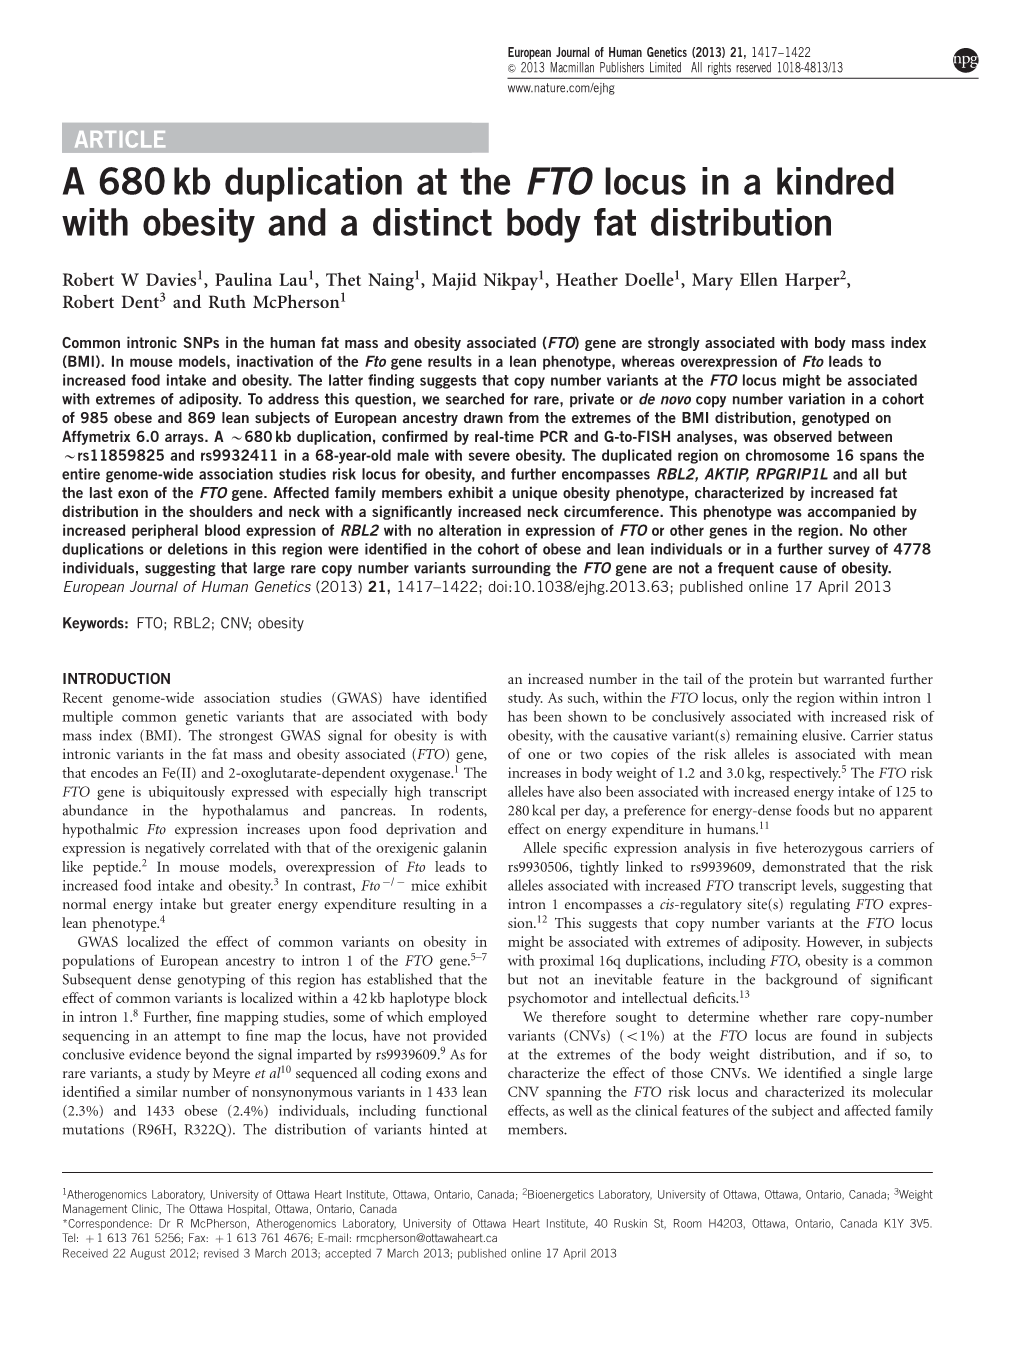 Kb Duplication at the FTO Locus in a Kindred with Obesity and a Distinct Body Fat Distribution